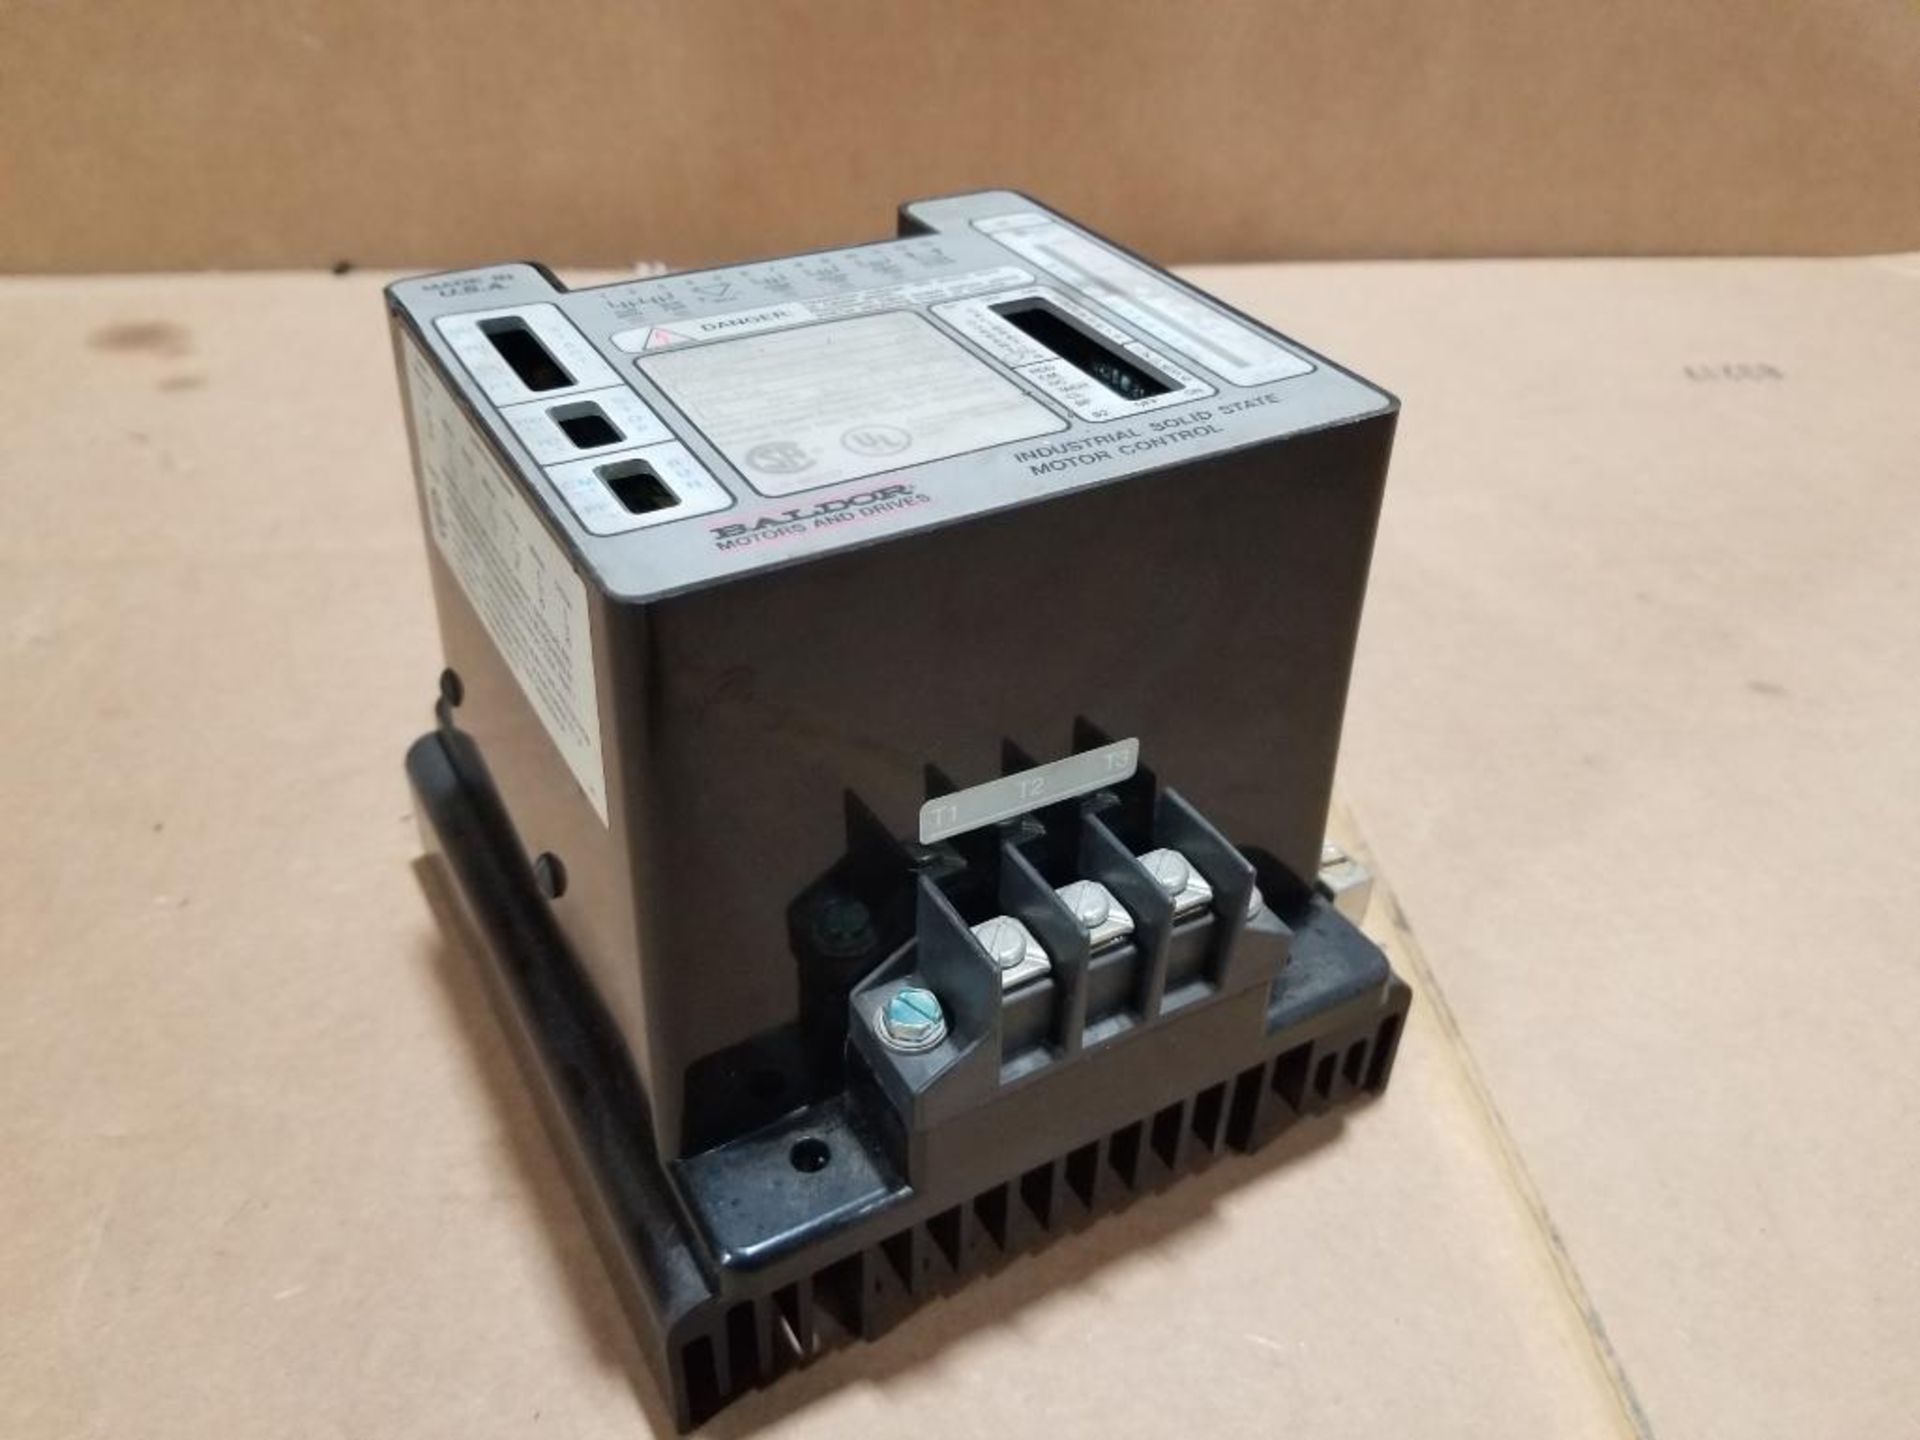 Baldor motors and drives. Industrial Solid State Motor Control. Catalog MA7008. - Image 6 of 6